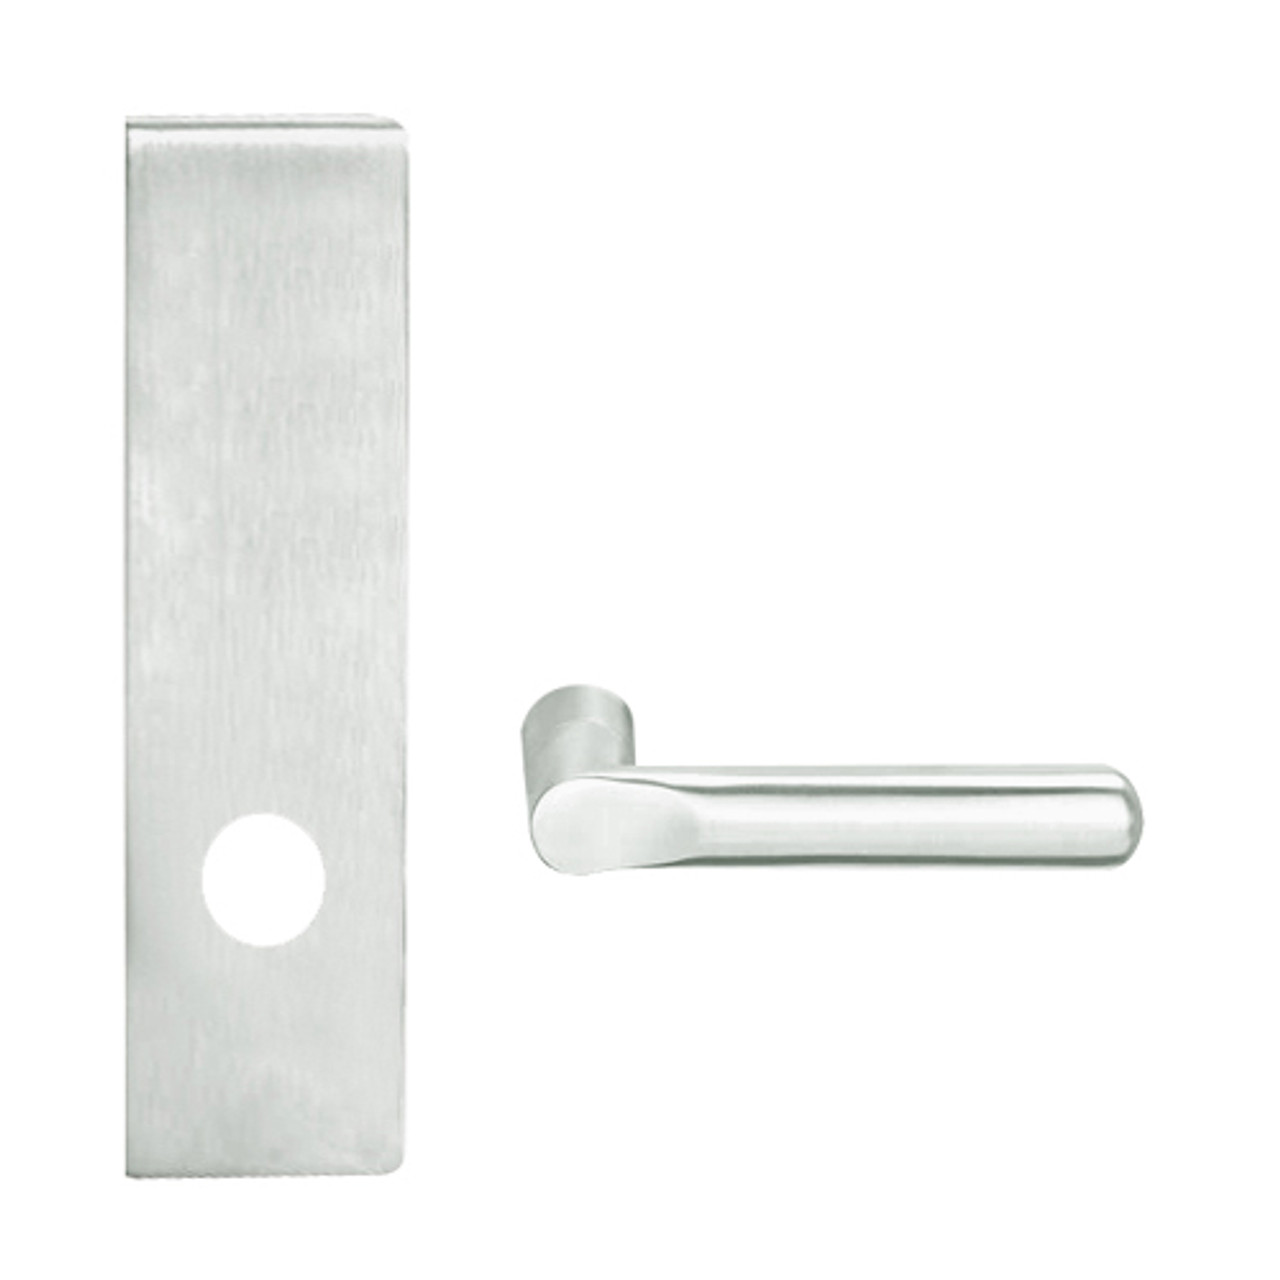 L0170-18N-619 Schlage L Series Single Dummy Trim Commercial Mortise Lock with 18 Cast Lever Design in Satin Nickel